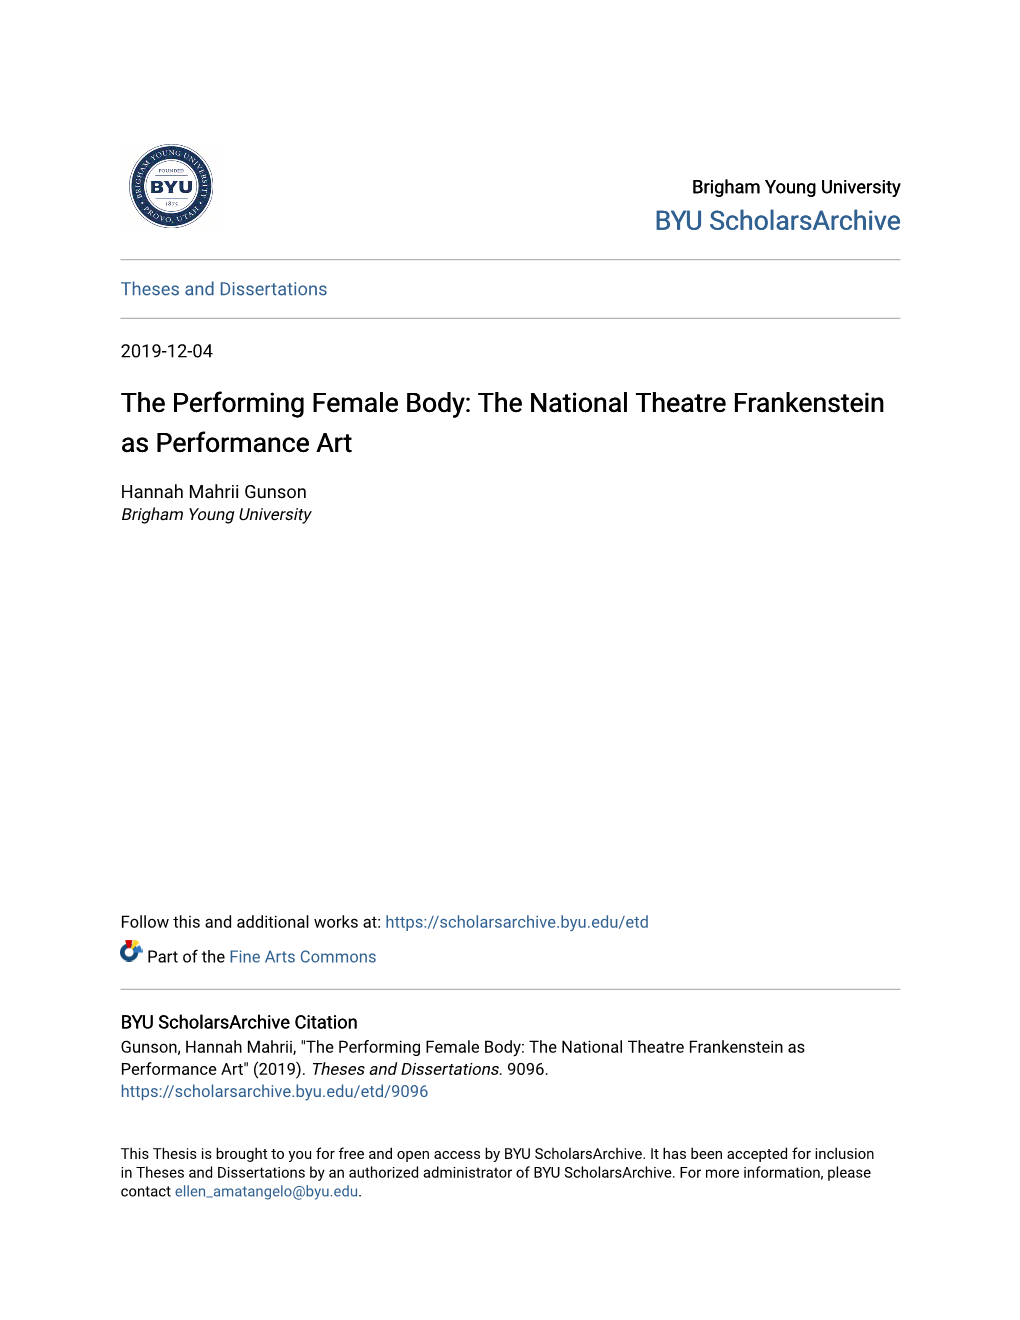 The National Theatre Frankenstein As Performance Art